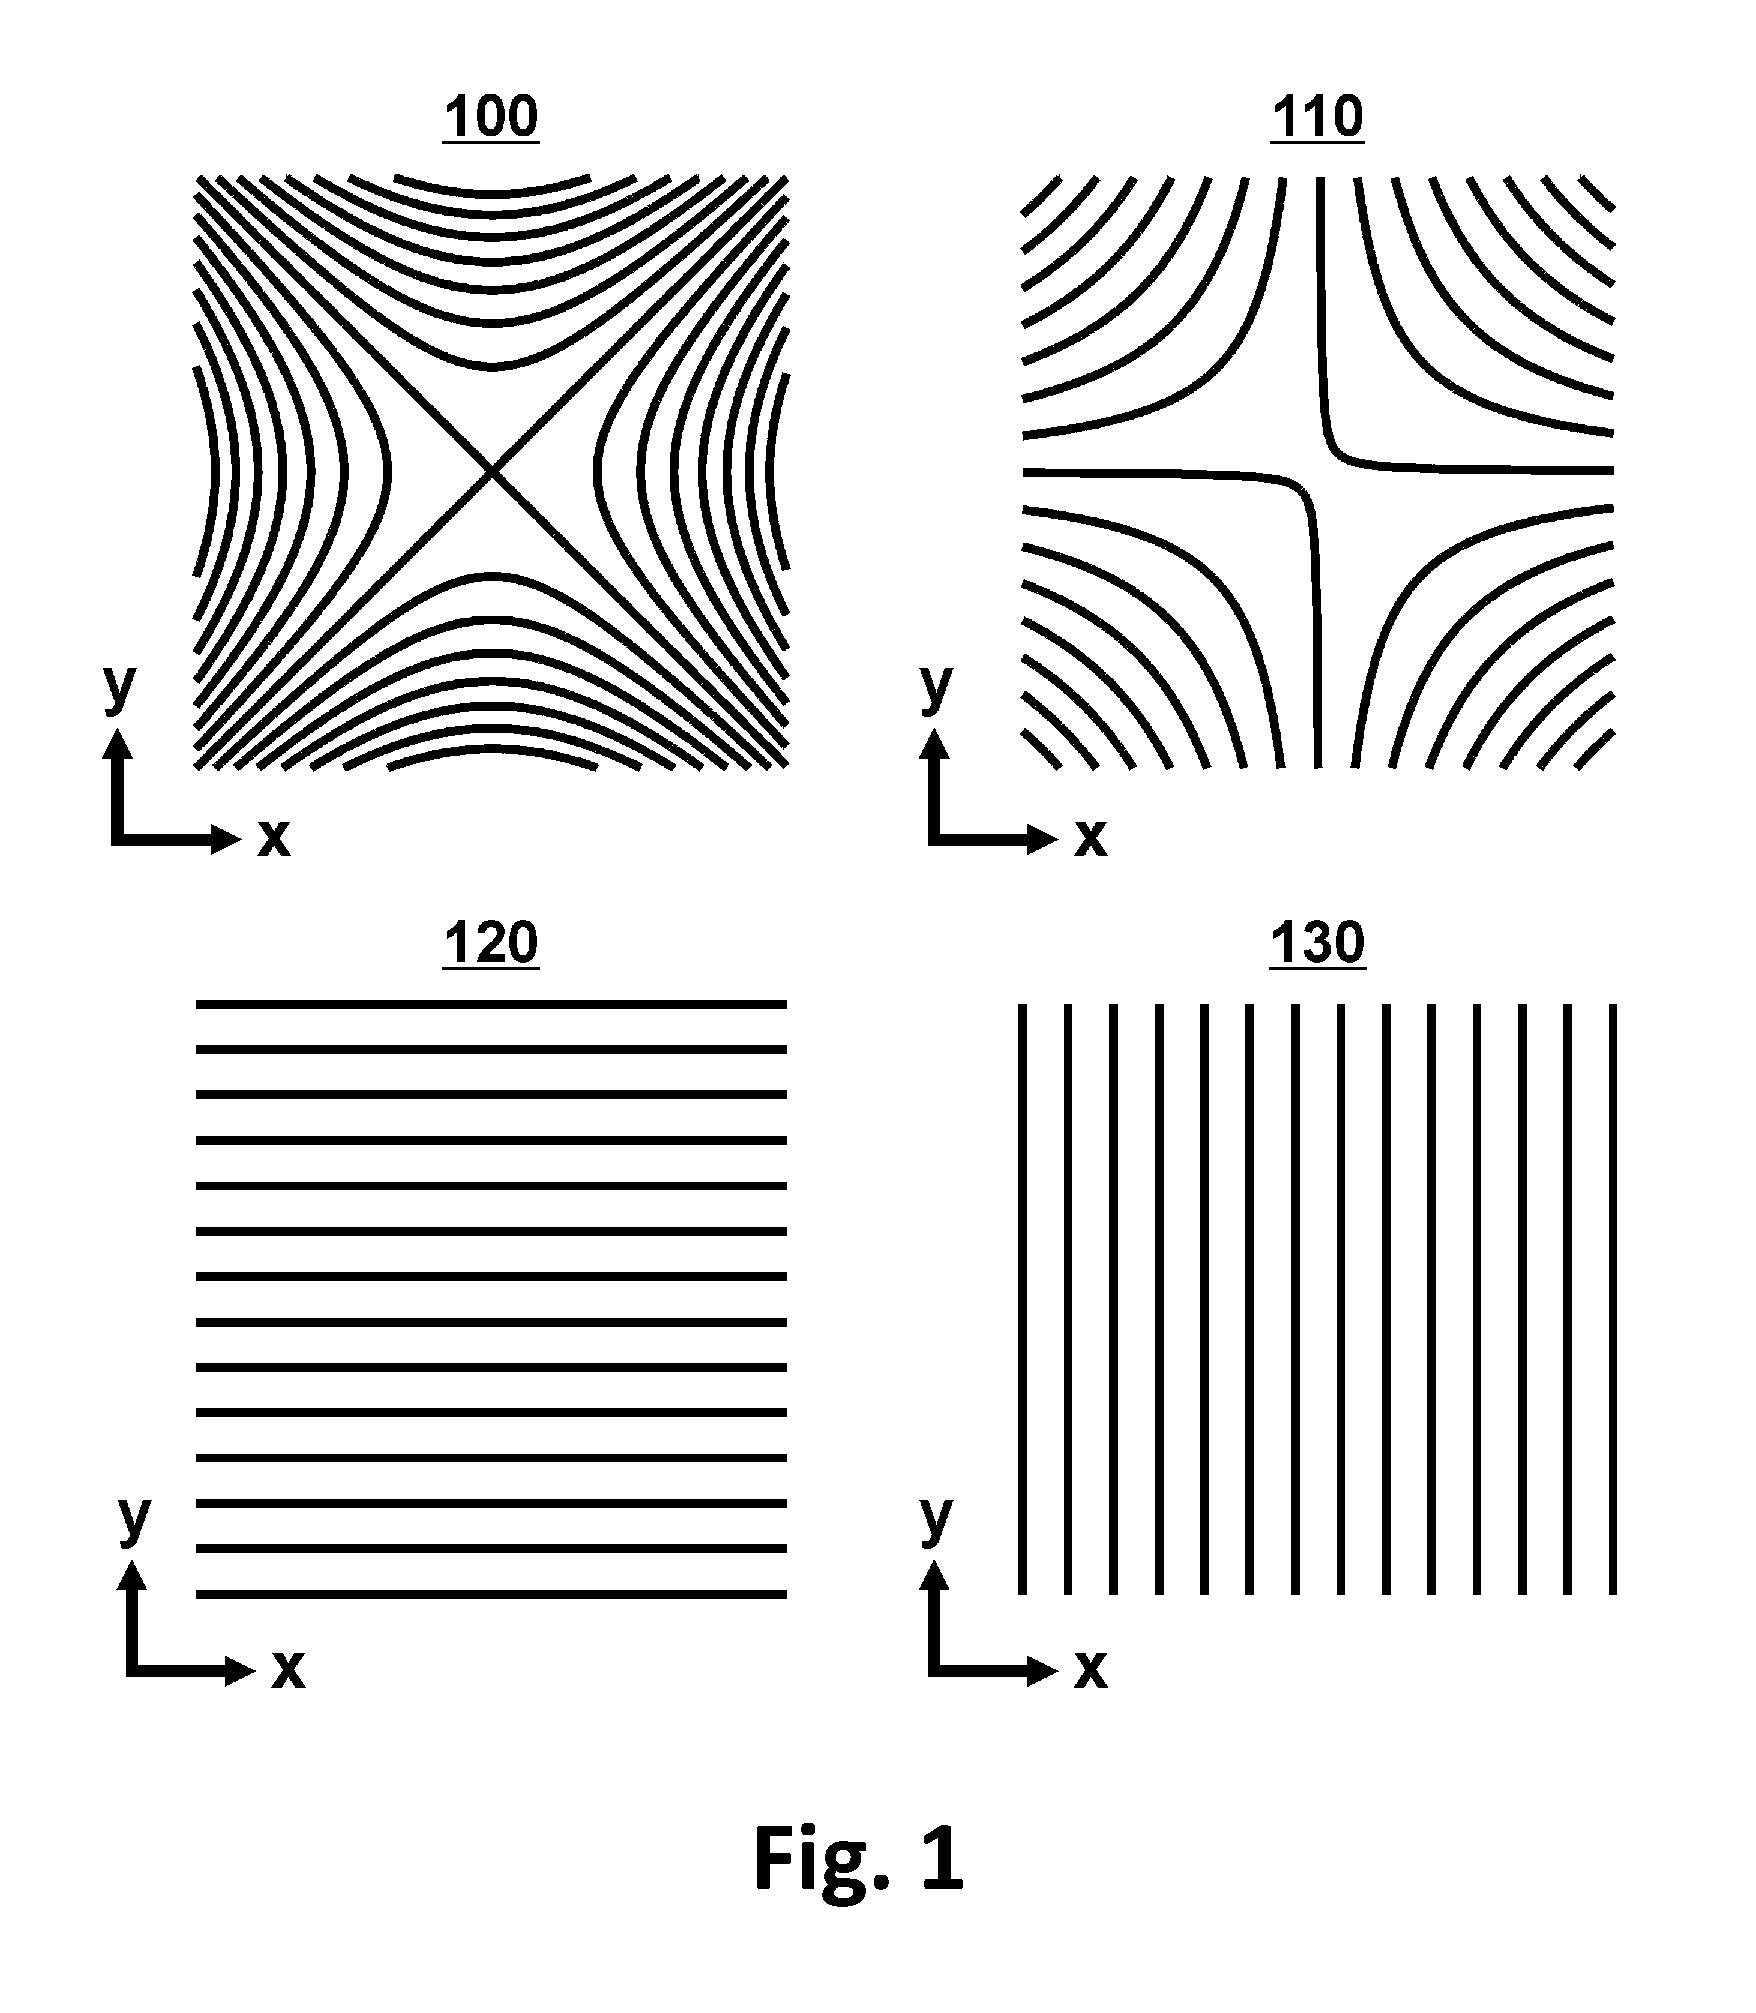 Method of magnetic resonance imaging for the selection and recording of curved slices